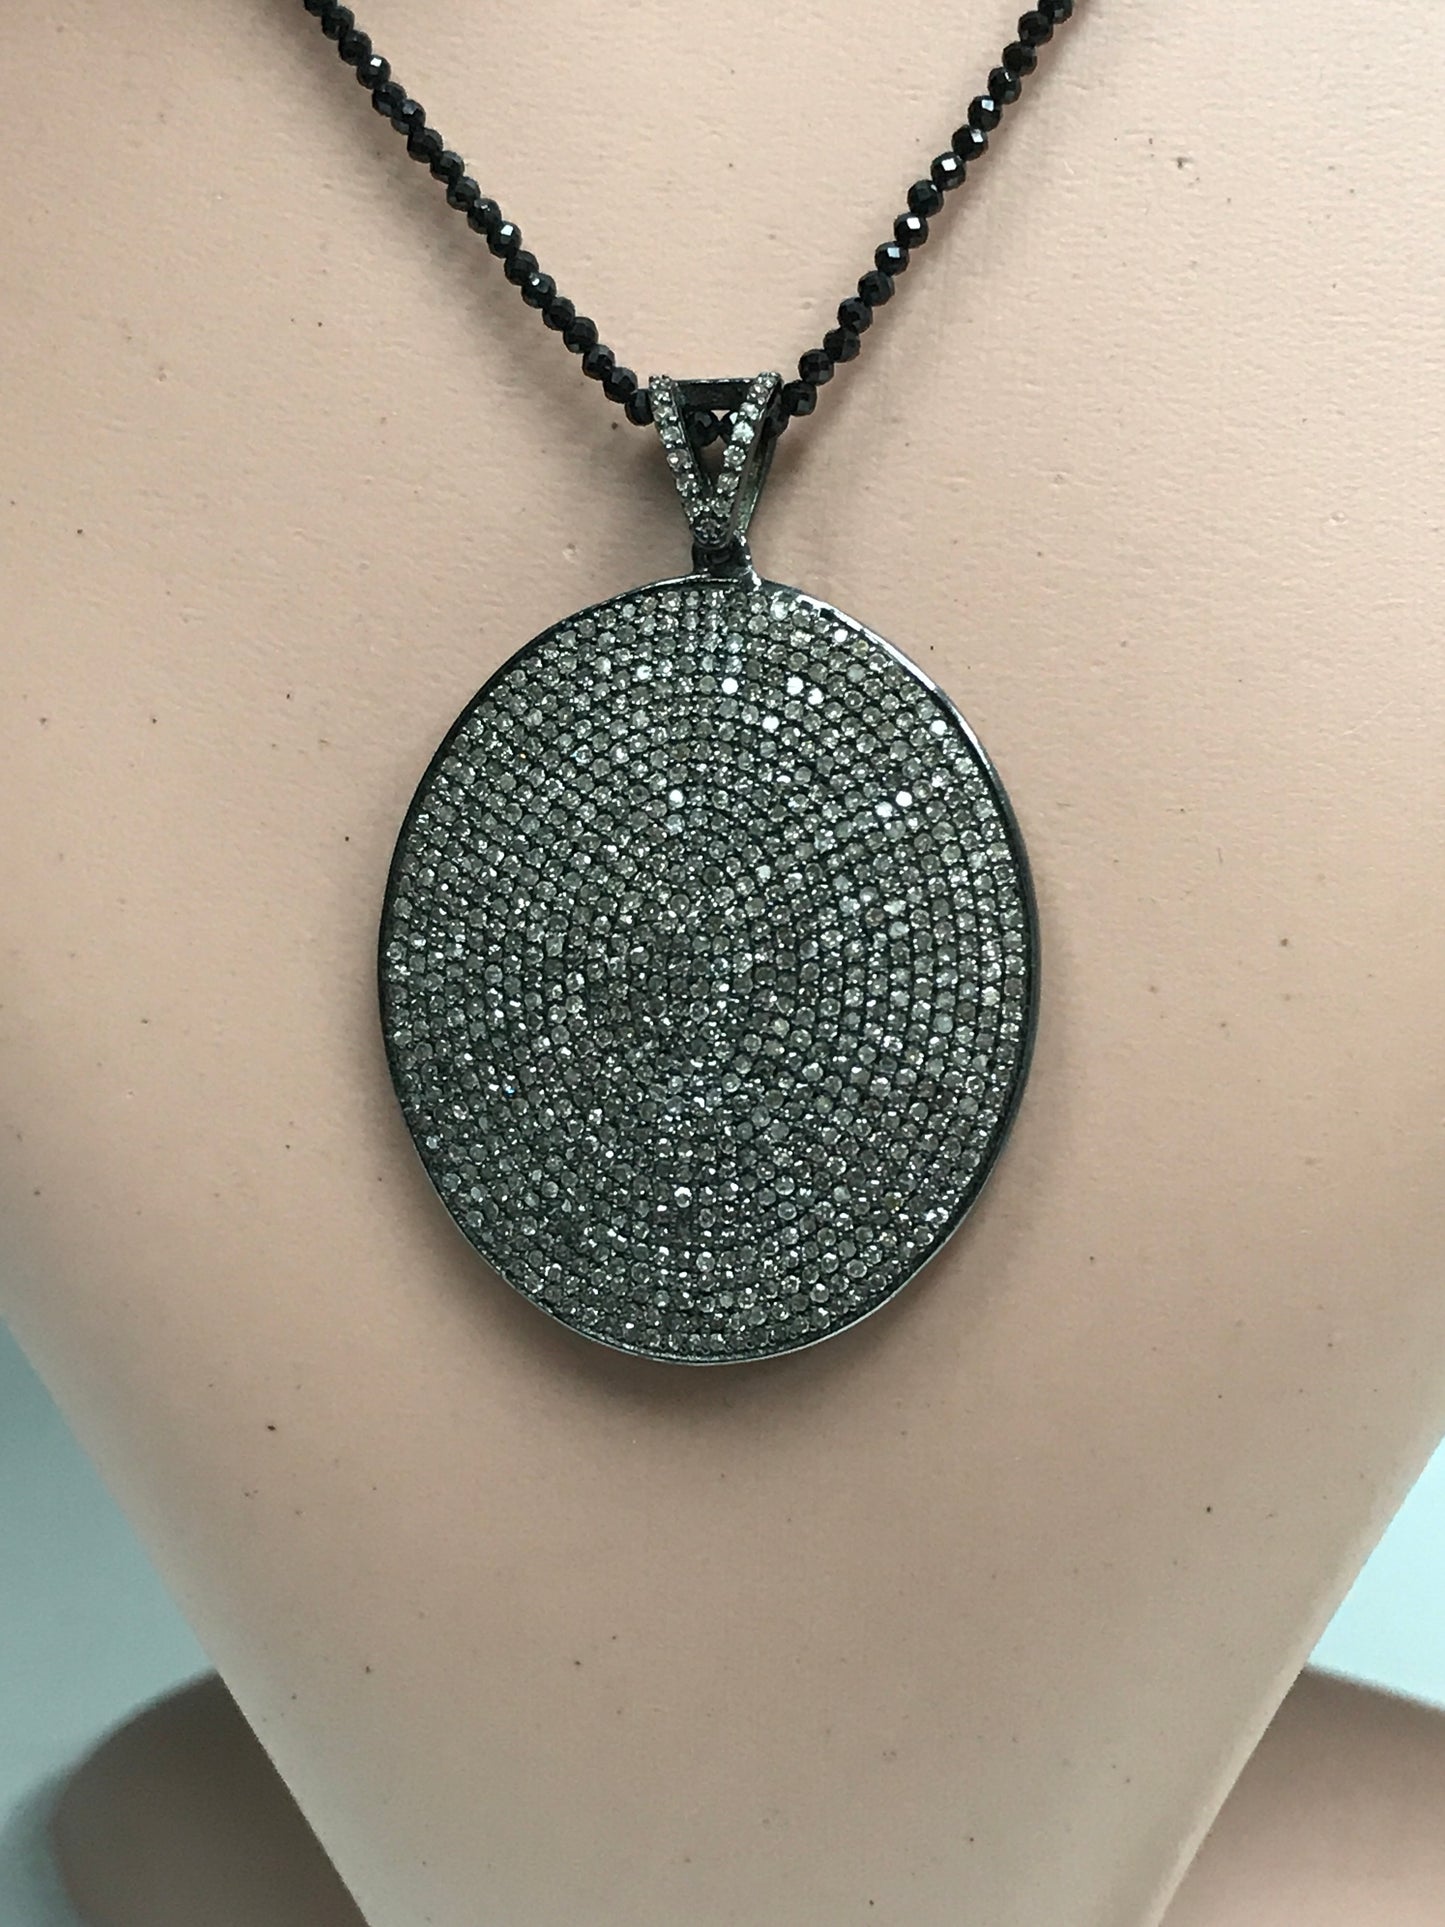 Diamond  Full Oval Pendant, Pave Diamond Pendant, Pave Full Oval Necklace, Approx 50 x 35mm. Sterling Silver